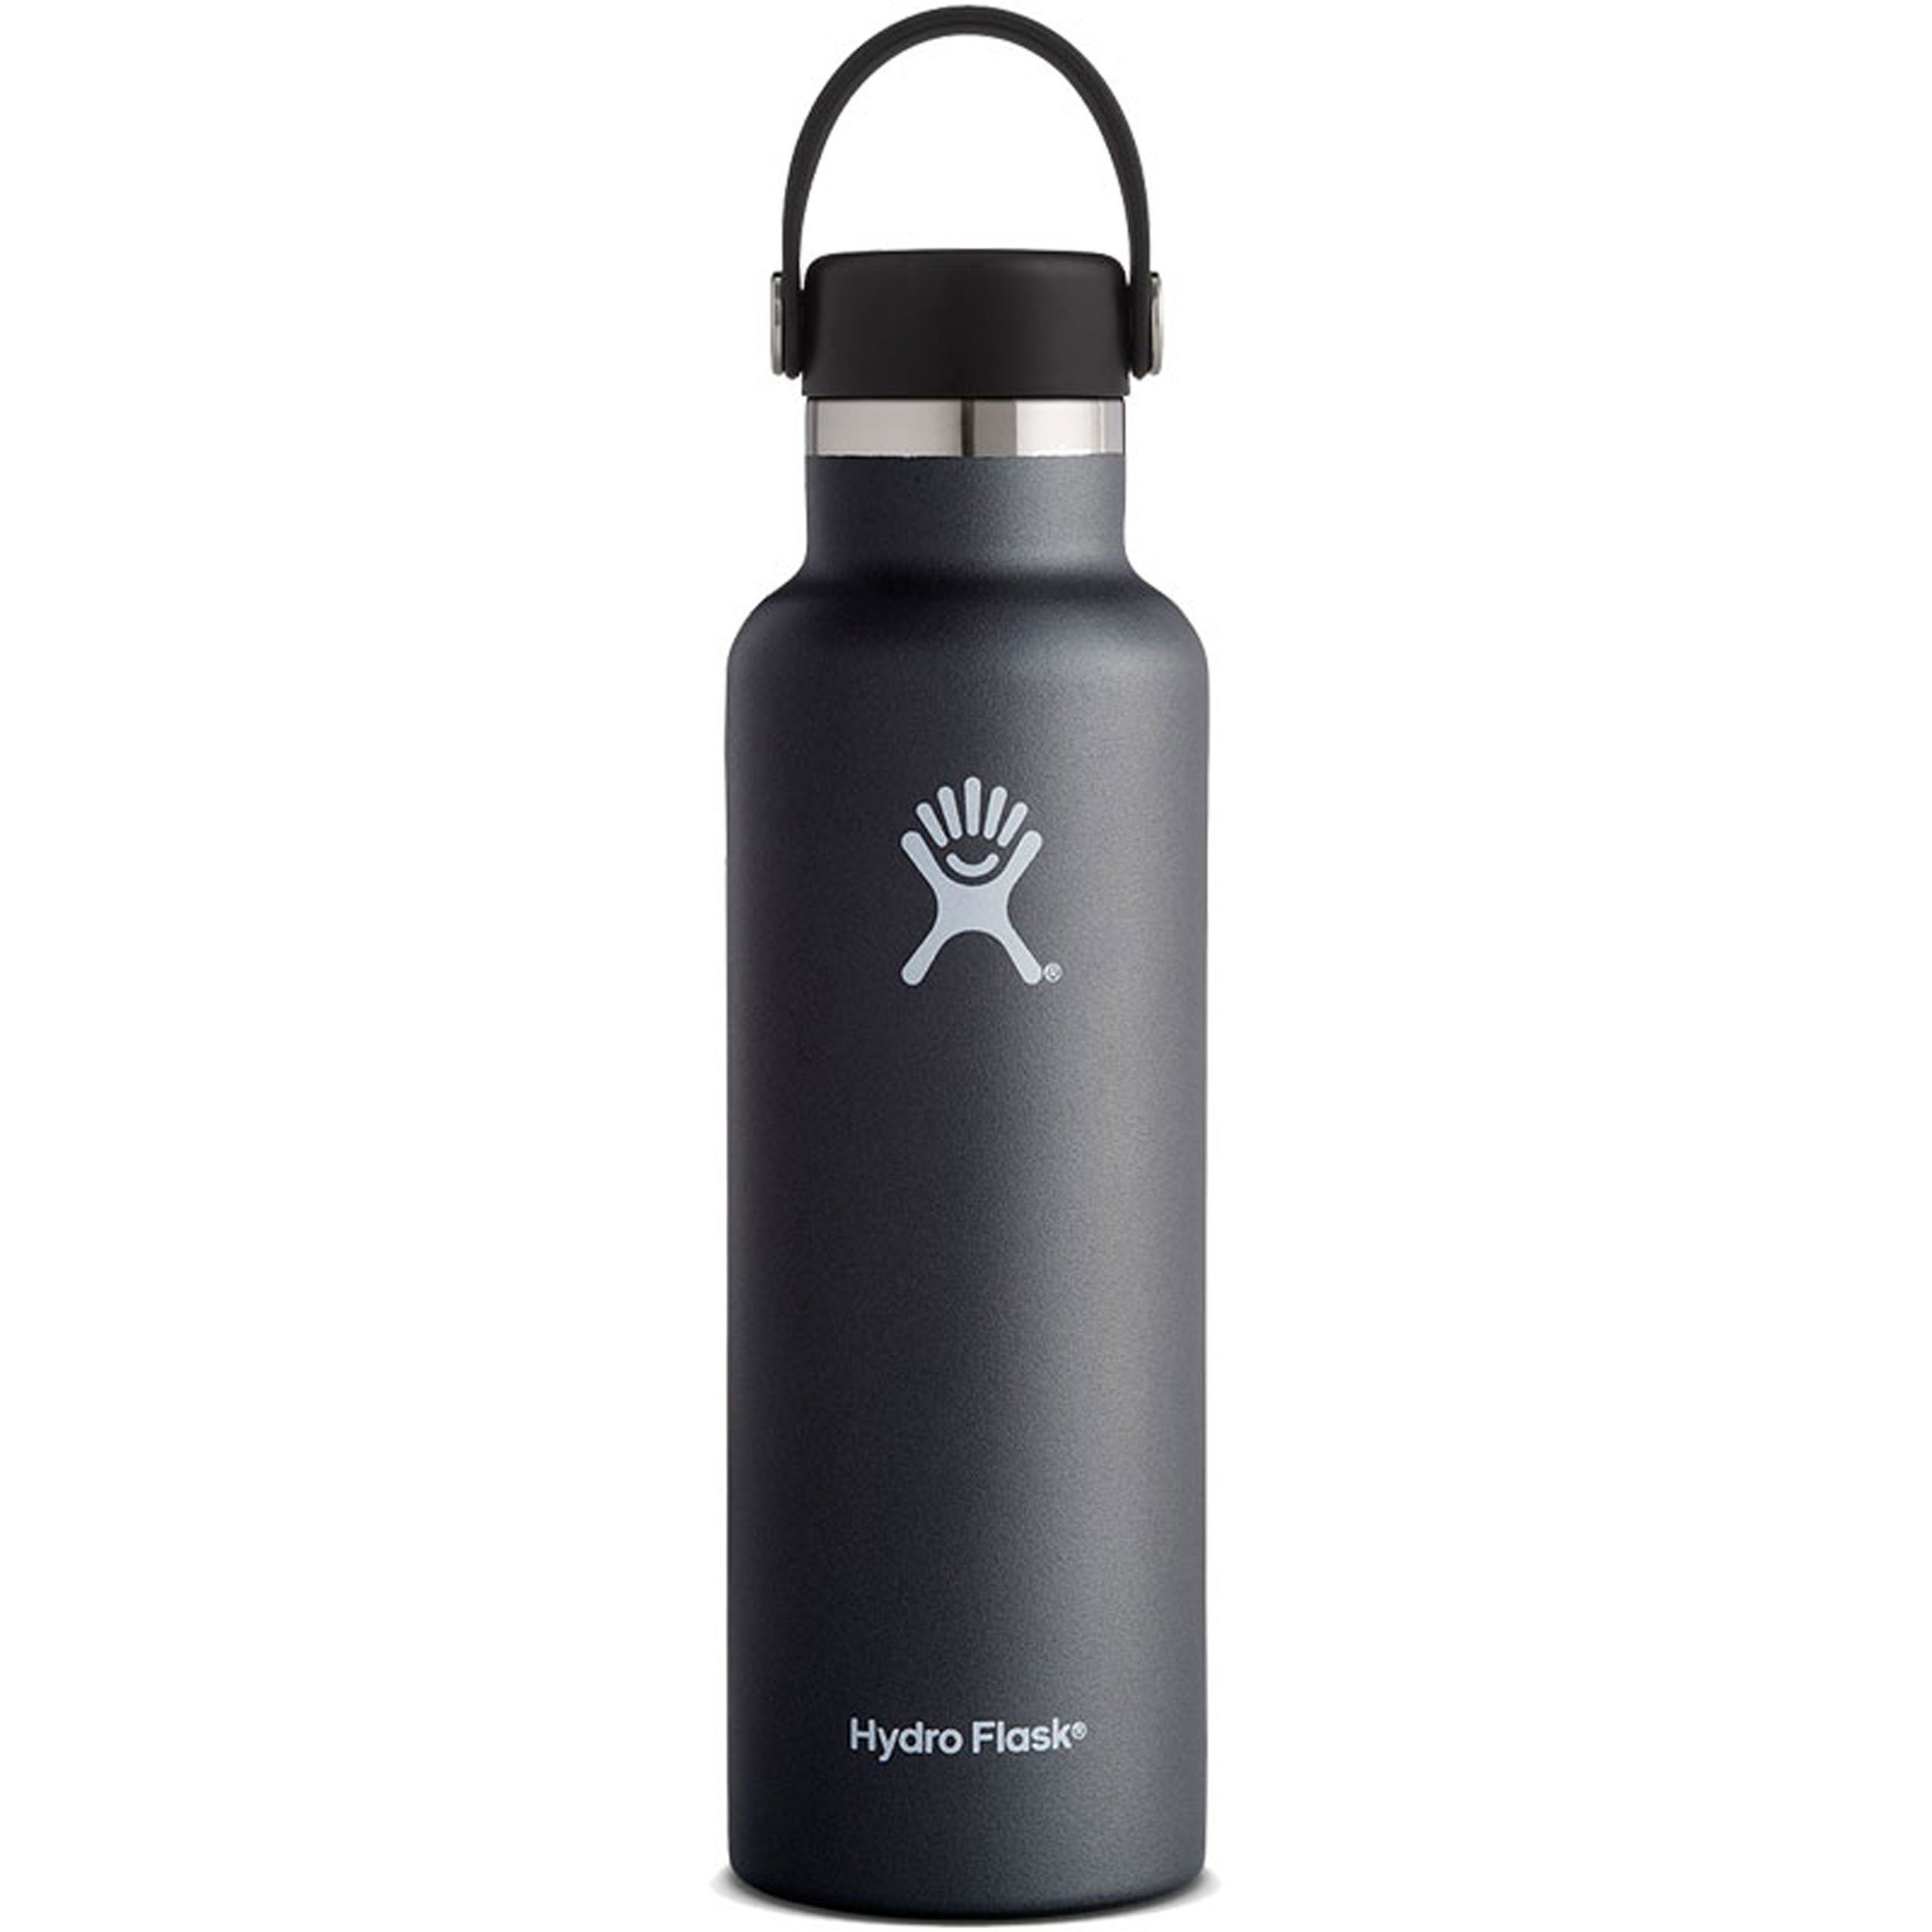 Hydro Isolierflasche/Thermoflasche Bottle Flask black Standard - Mouth Isolierflasche Flask Hydro